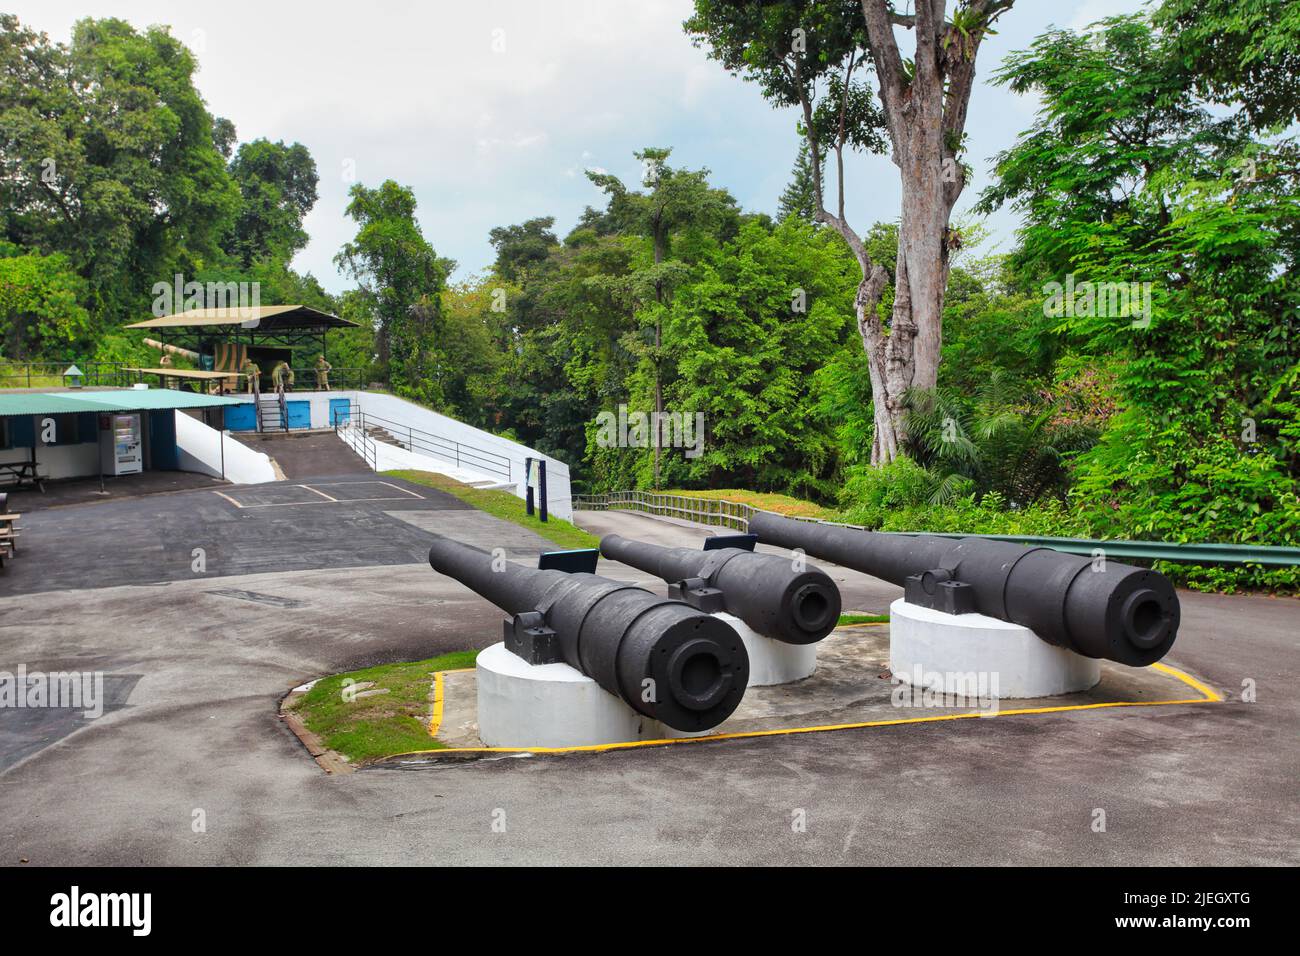 Sentosa Island, Singapore : October 20, 2019 - Cannon placed at Fort Siloso Stock Photo